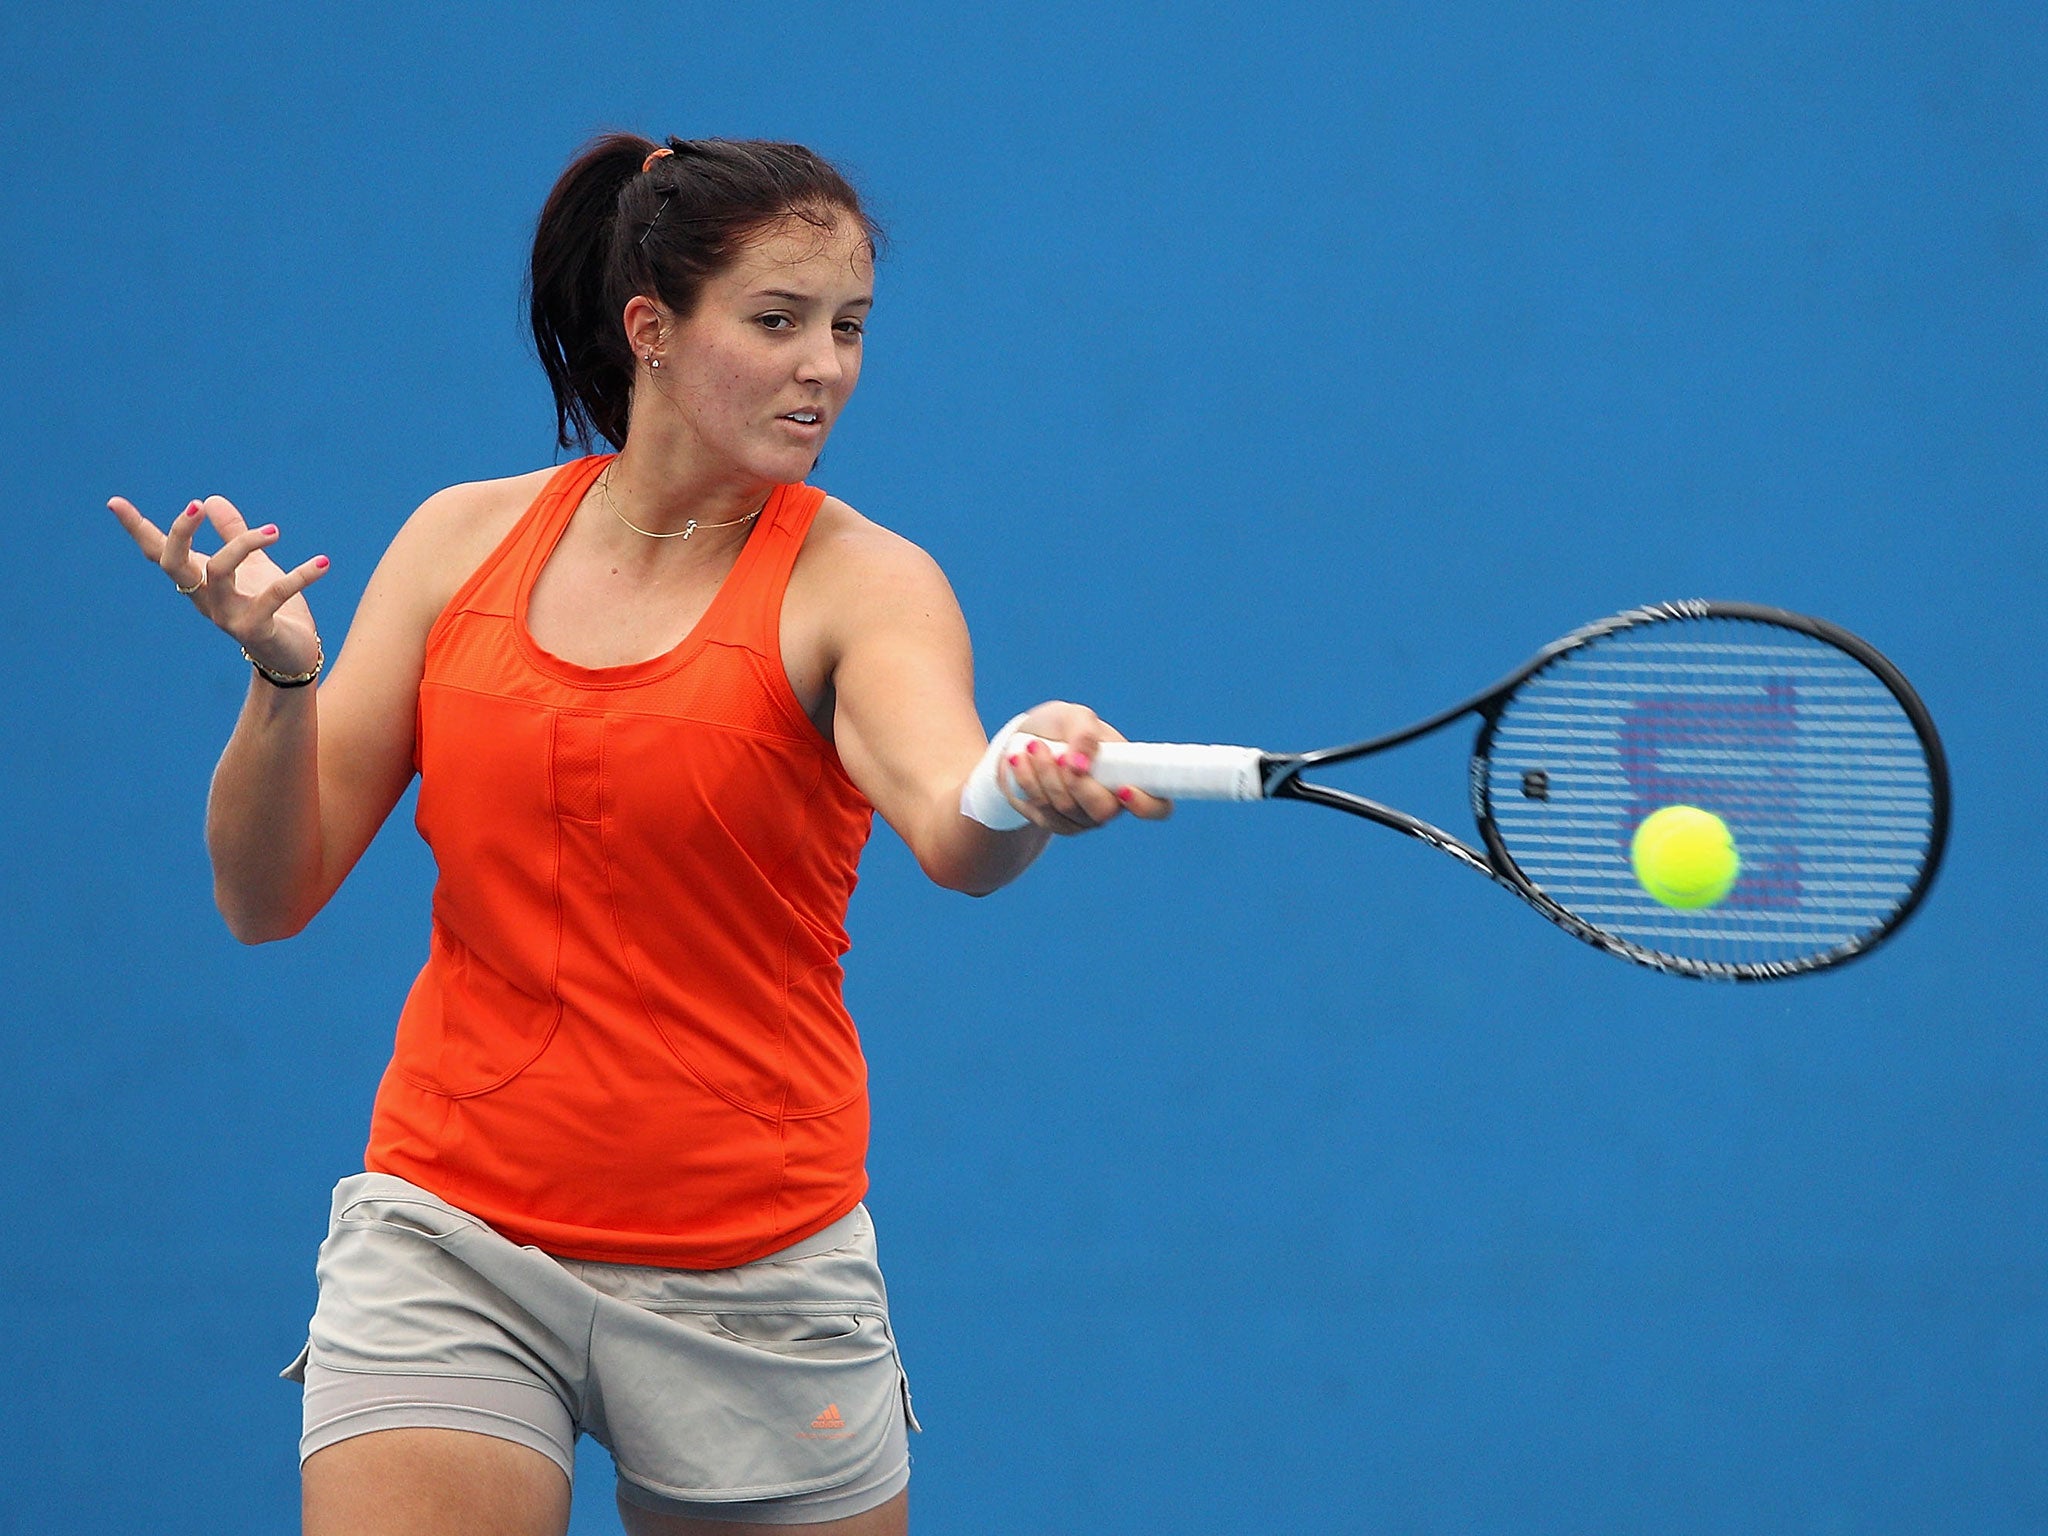 Laura Robson has pulled out of the 2015 French Open